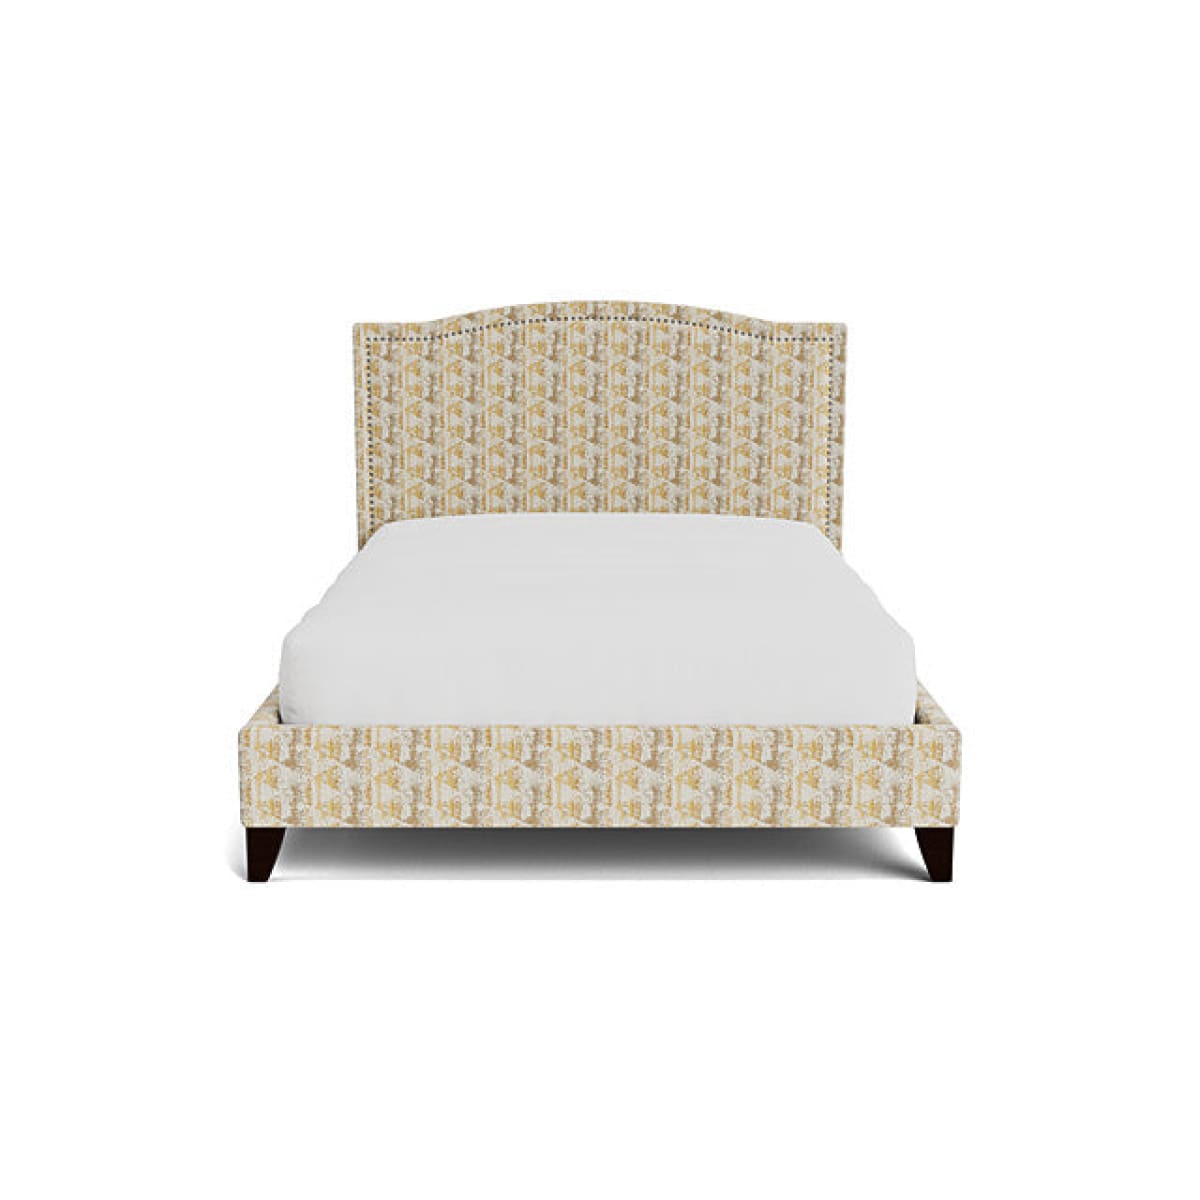 Elise Bed - Voyager Buttercup